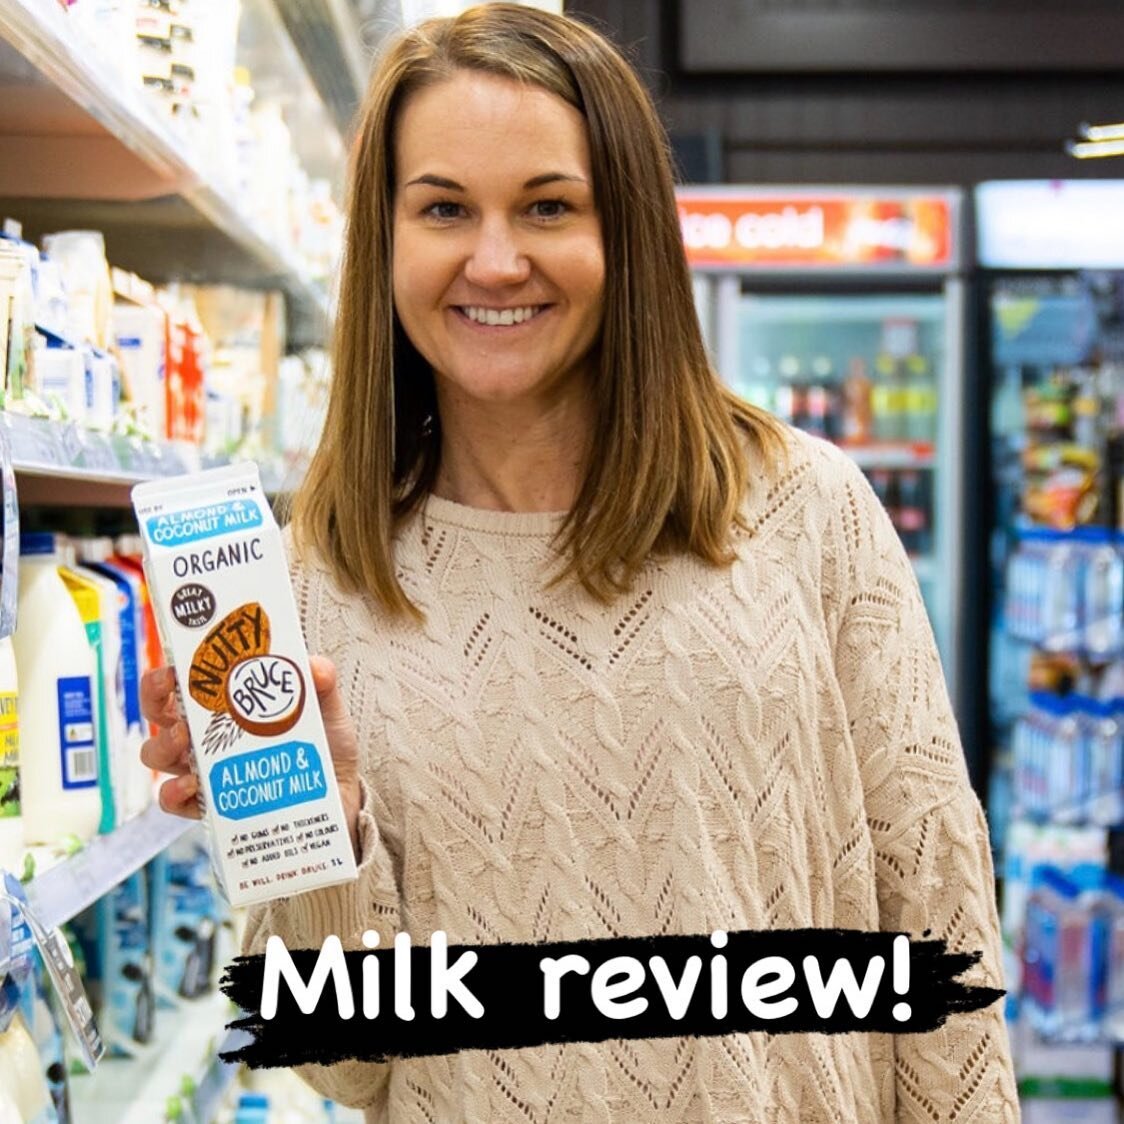 Milk... let's talk milk! 

This week I reviewed over 50 milks from Cow's milk, goats' milk, almond milk, oat milk, soy milk, coconut milk and rice milk. I&rsquo;m not here to tell you what milk is best for you because everyone is different and has di